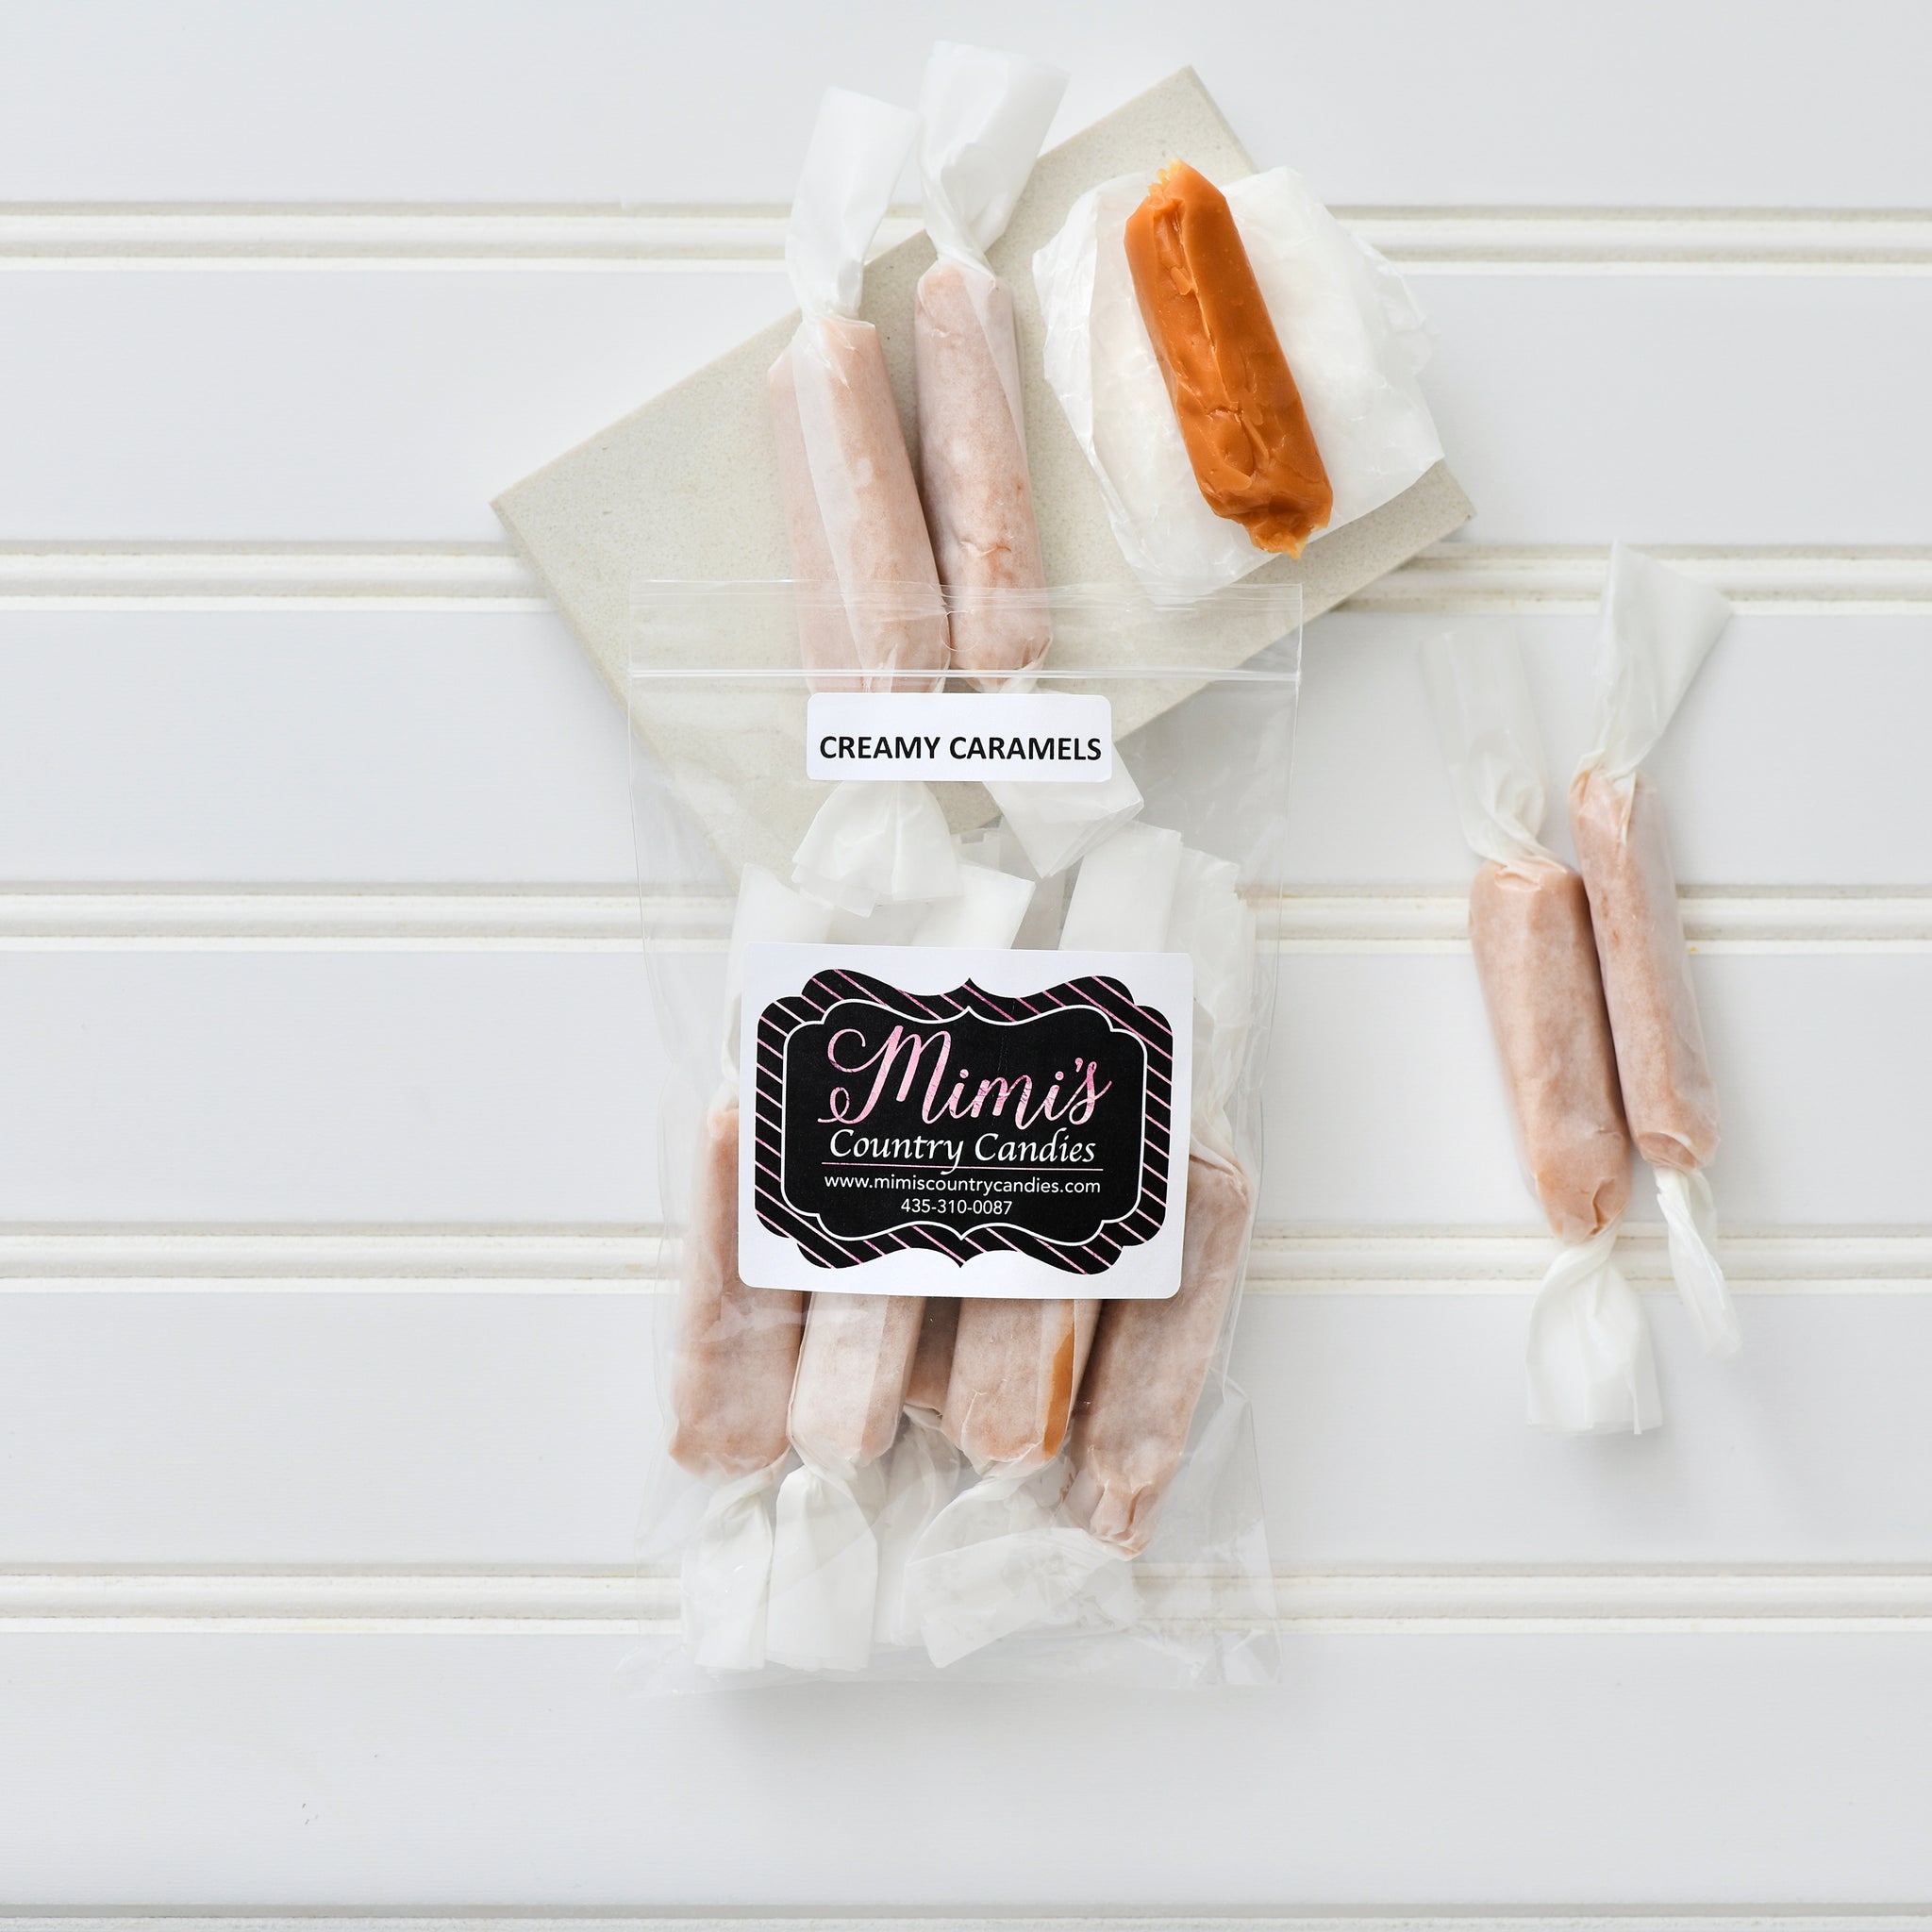 Mimi's Country Candies Creamy Caramels